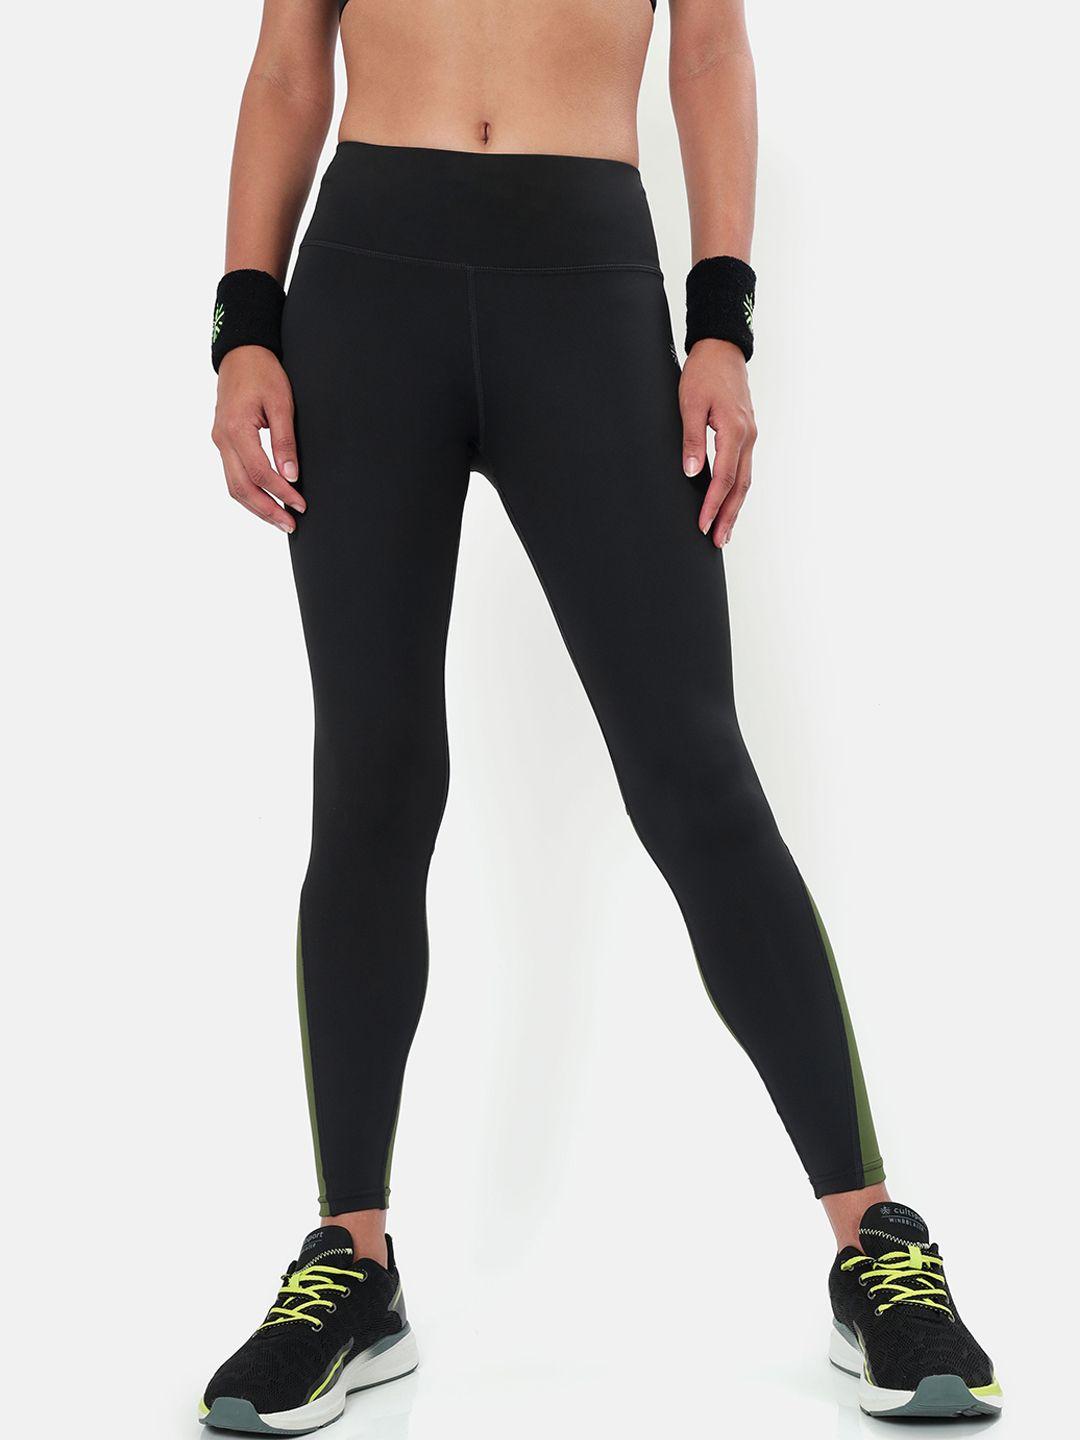 cultsport women black & olive green absolute fit sports tights